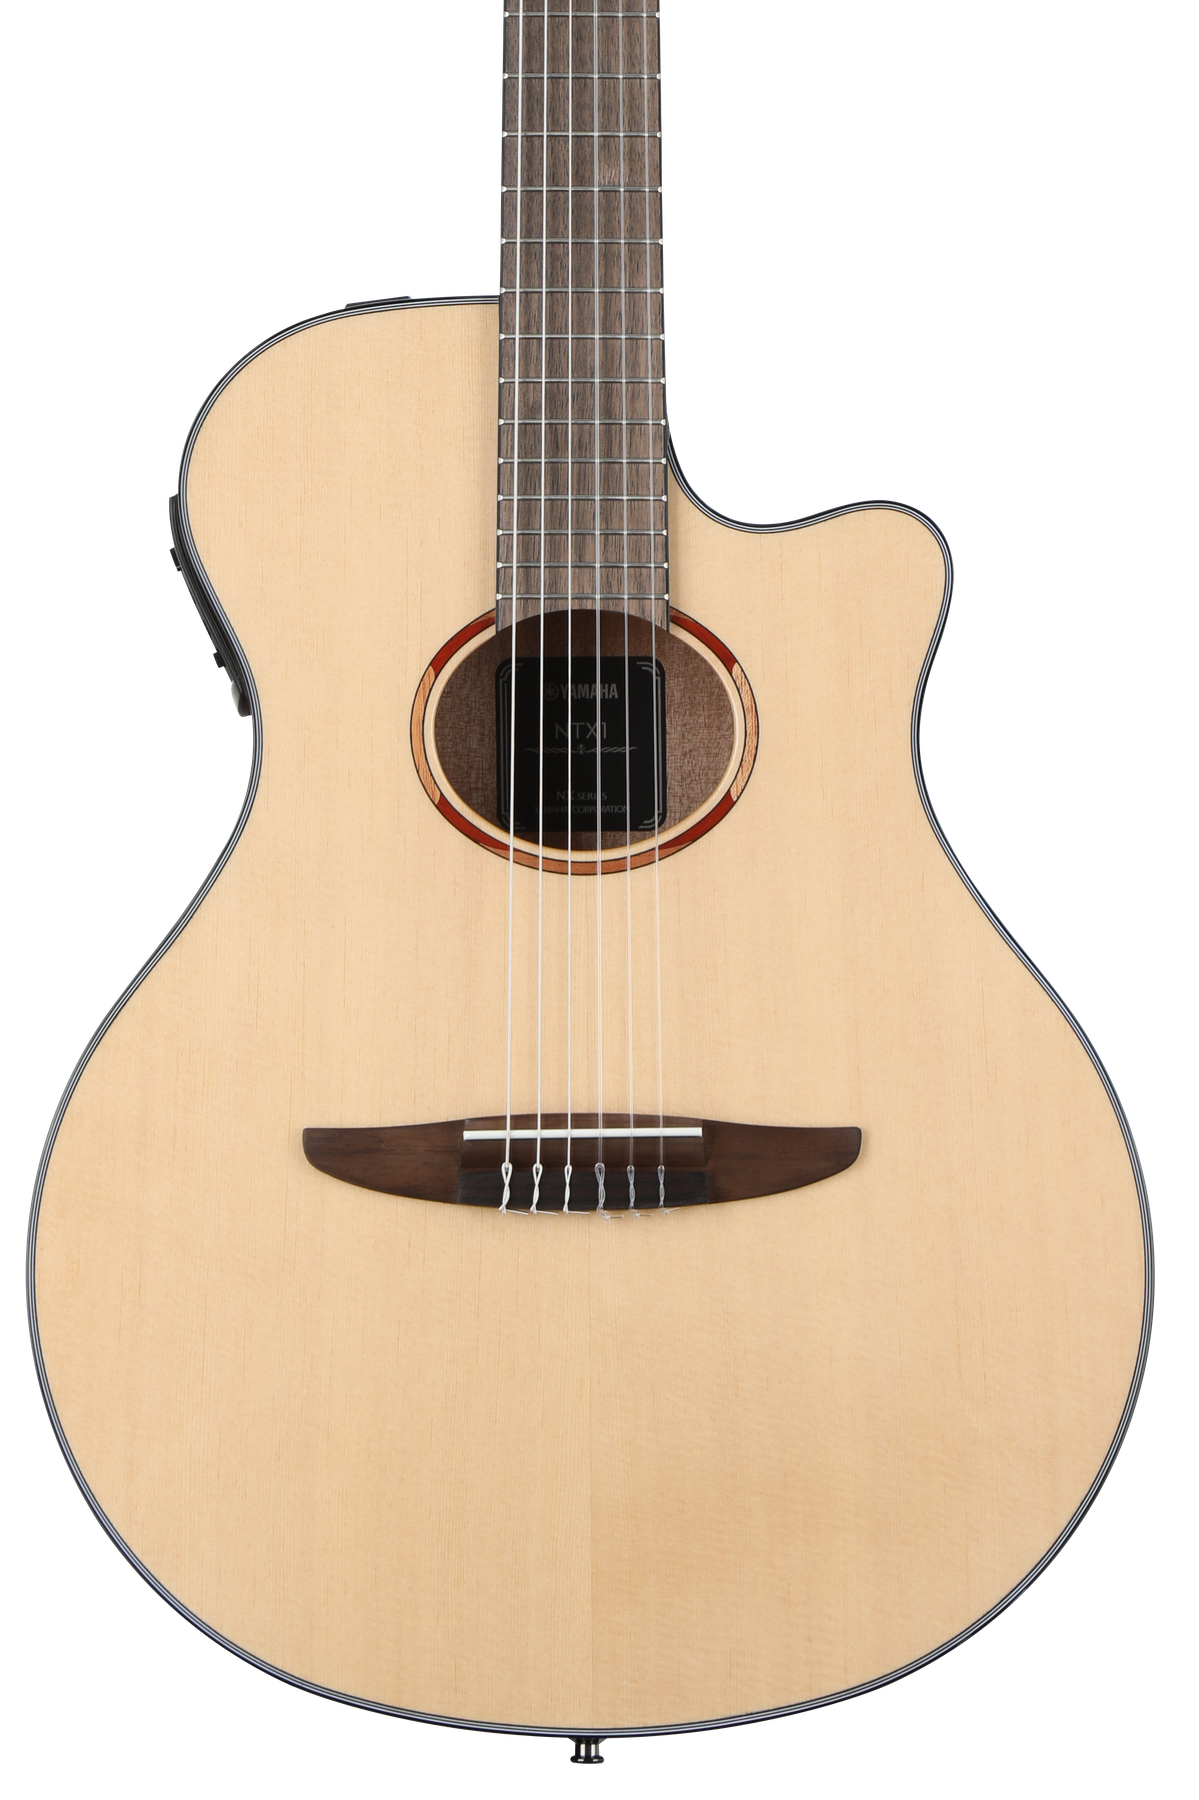 Yamaha NTX5 Nylon-string Acoustic-electric Guitar - Natural | Sweetwater